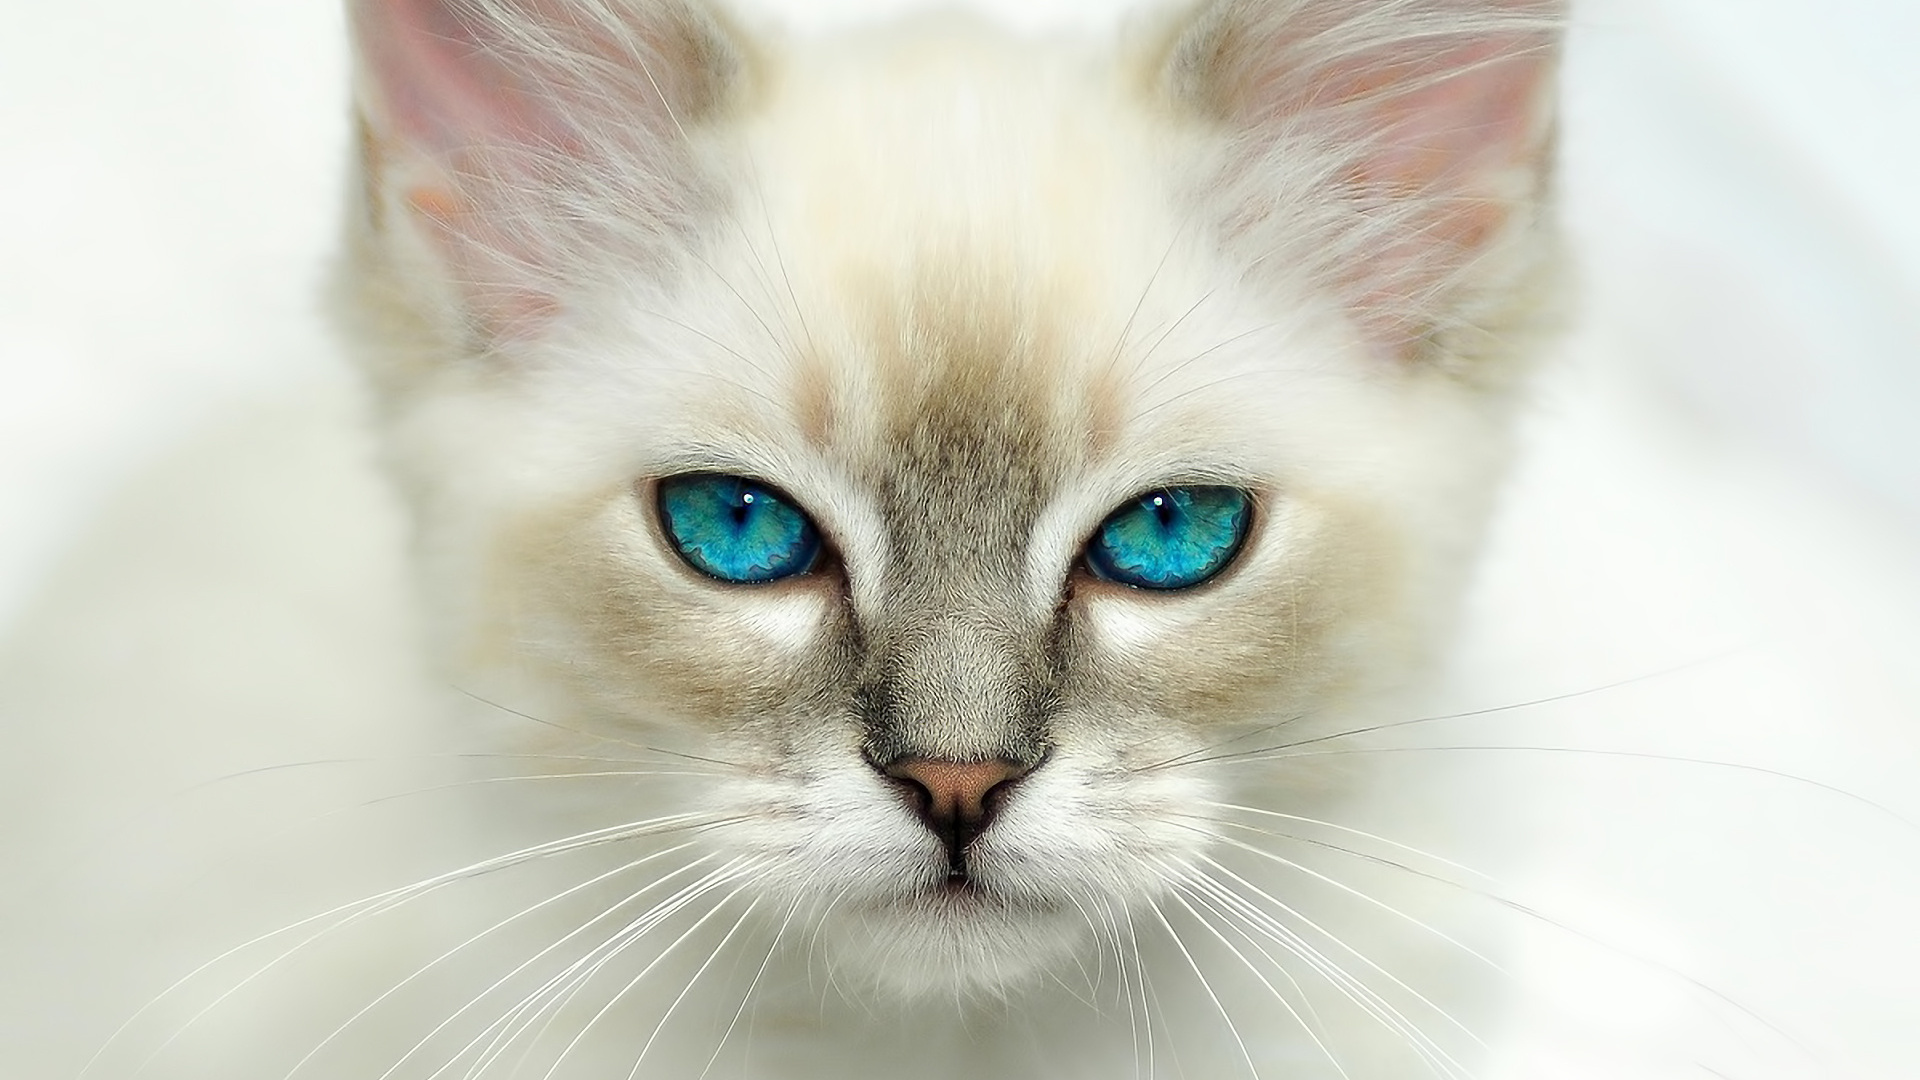 Cat Full HD Wallpaper and Background Image | 1920x1080 | ID:441301